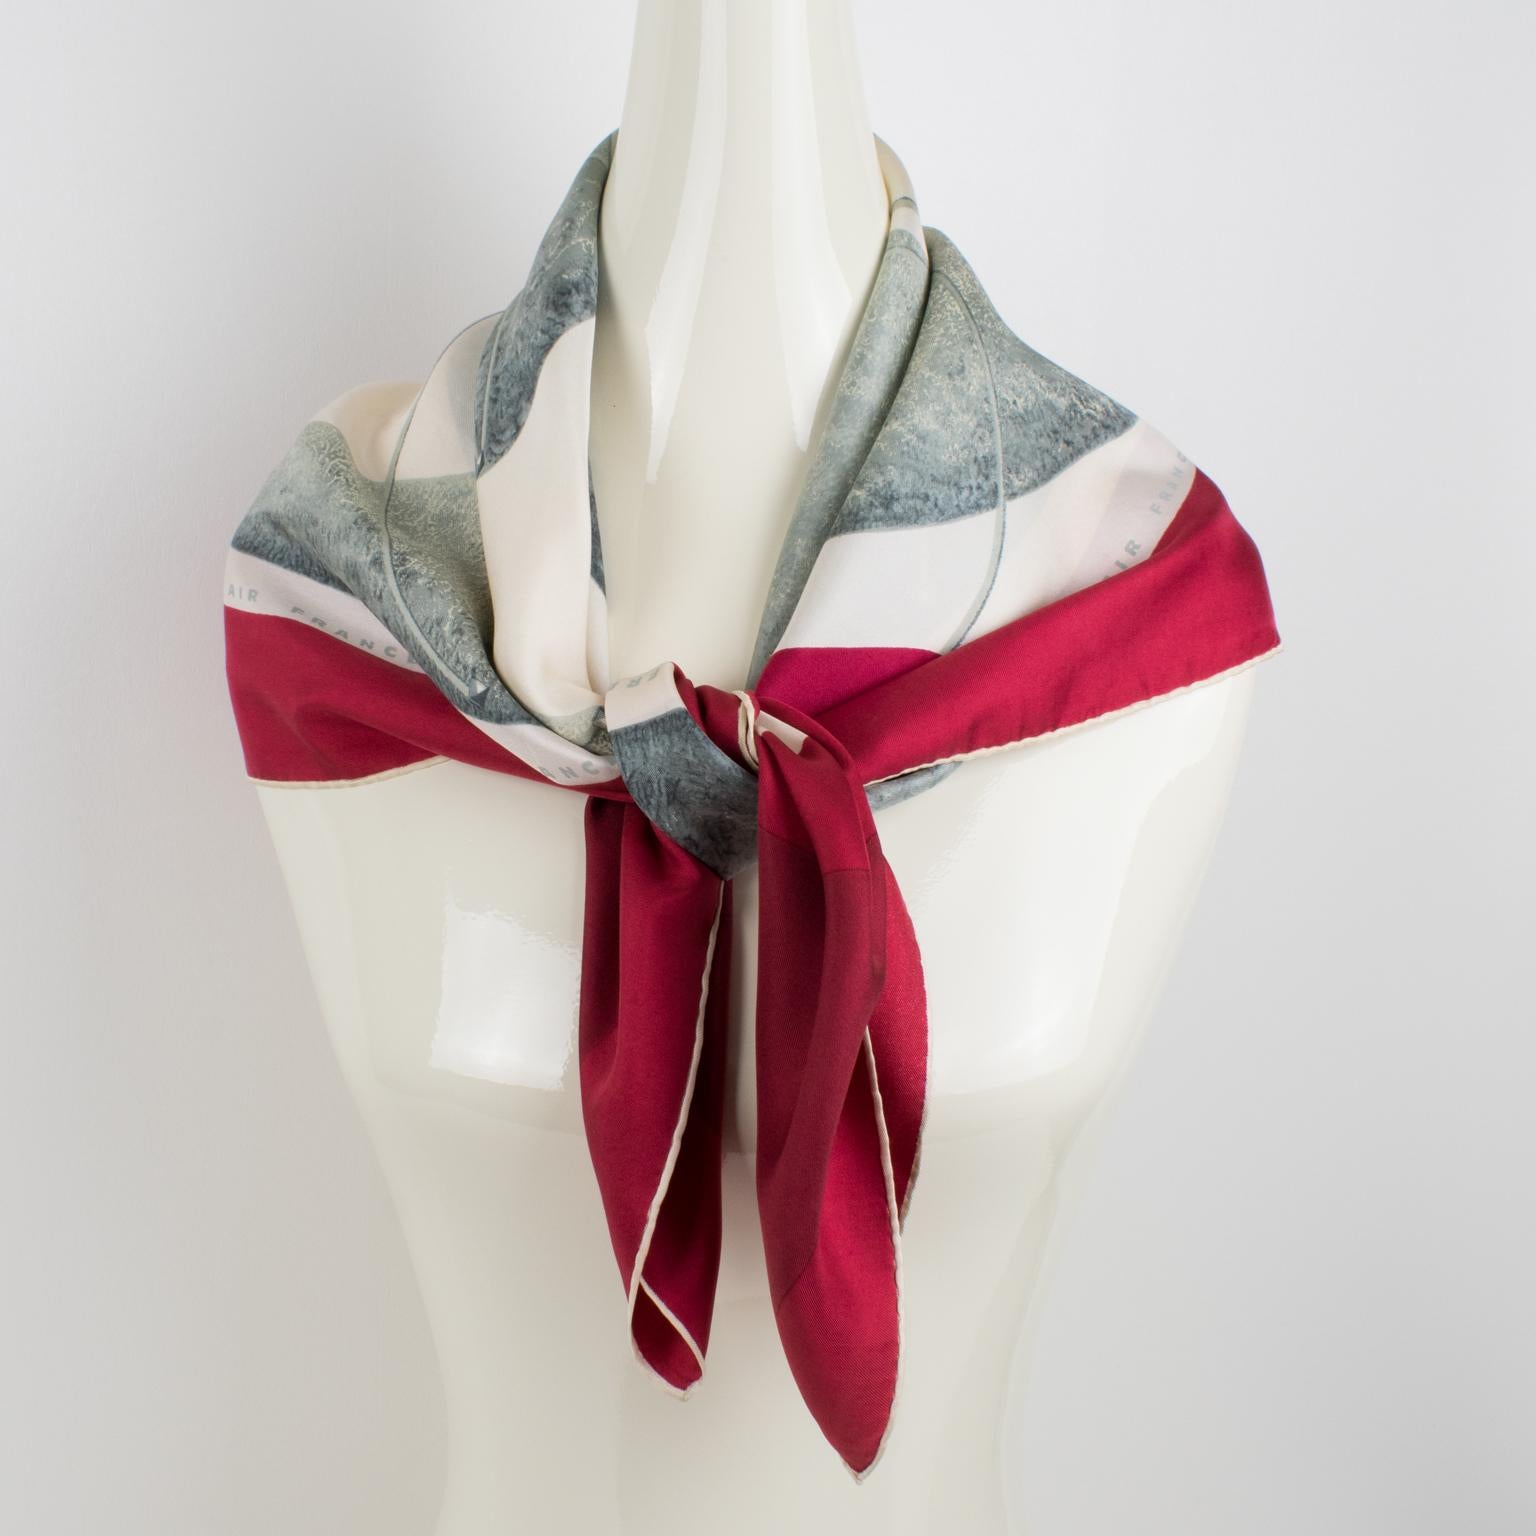 This lovely promotional Air France silk scarf has a very chic colored pattern print with an abstract design featuring a globe of the planet with stylized continents. The piece features a vibrant ruby-red border with bright gray and white colors. The